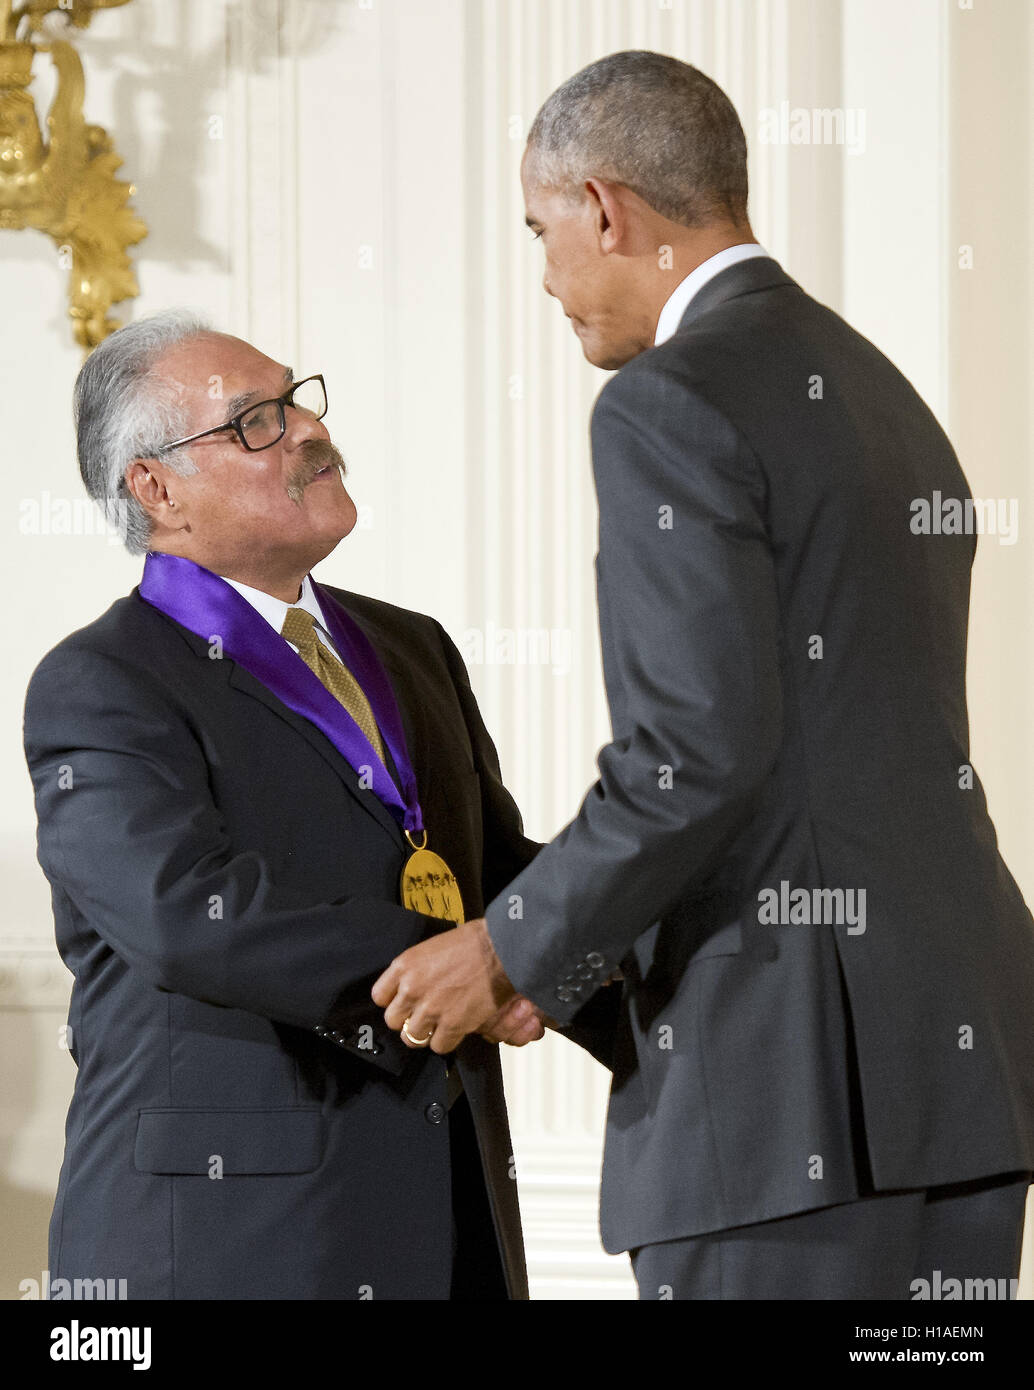 Washington, District of Columbia, USA. 22nd Sep, 2016. United States President Barack Obama presents the 2015 National Medal of Arts to Luis Valdez, Playwright, Actor, Writer, & Director of San Juan Bautista, California, during a ceremony in the East Room of the White House in Washington, DC on Thursday, September 22, 2016.Credit: Ron Sachs/CNP Credit:  Ron Sachs/CNP/ZUMA Wire/Alamy Live News Stock Photo